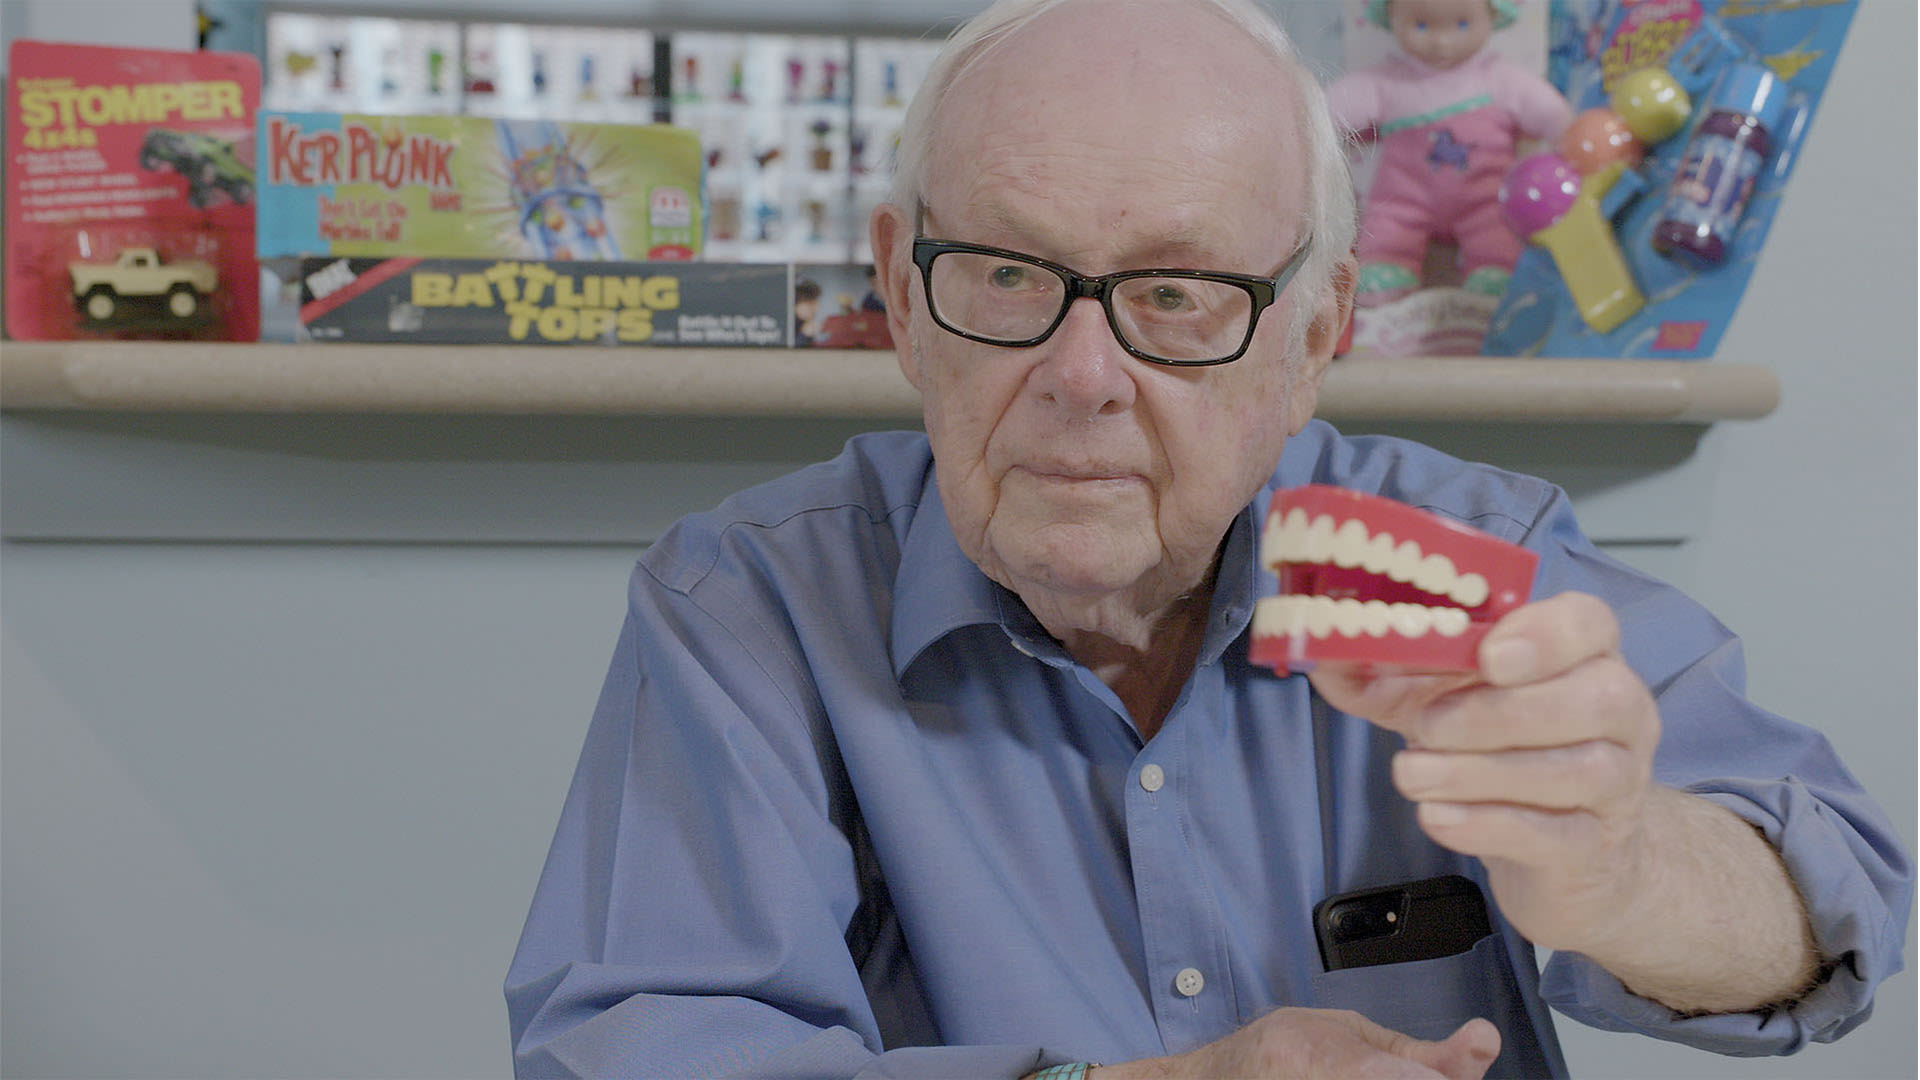 Watch The Man Who Invented More Than Eight Hundred Iconic Toys | The New Yorker Documentary | The Yorker